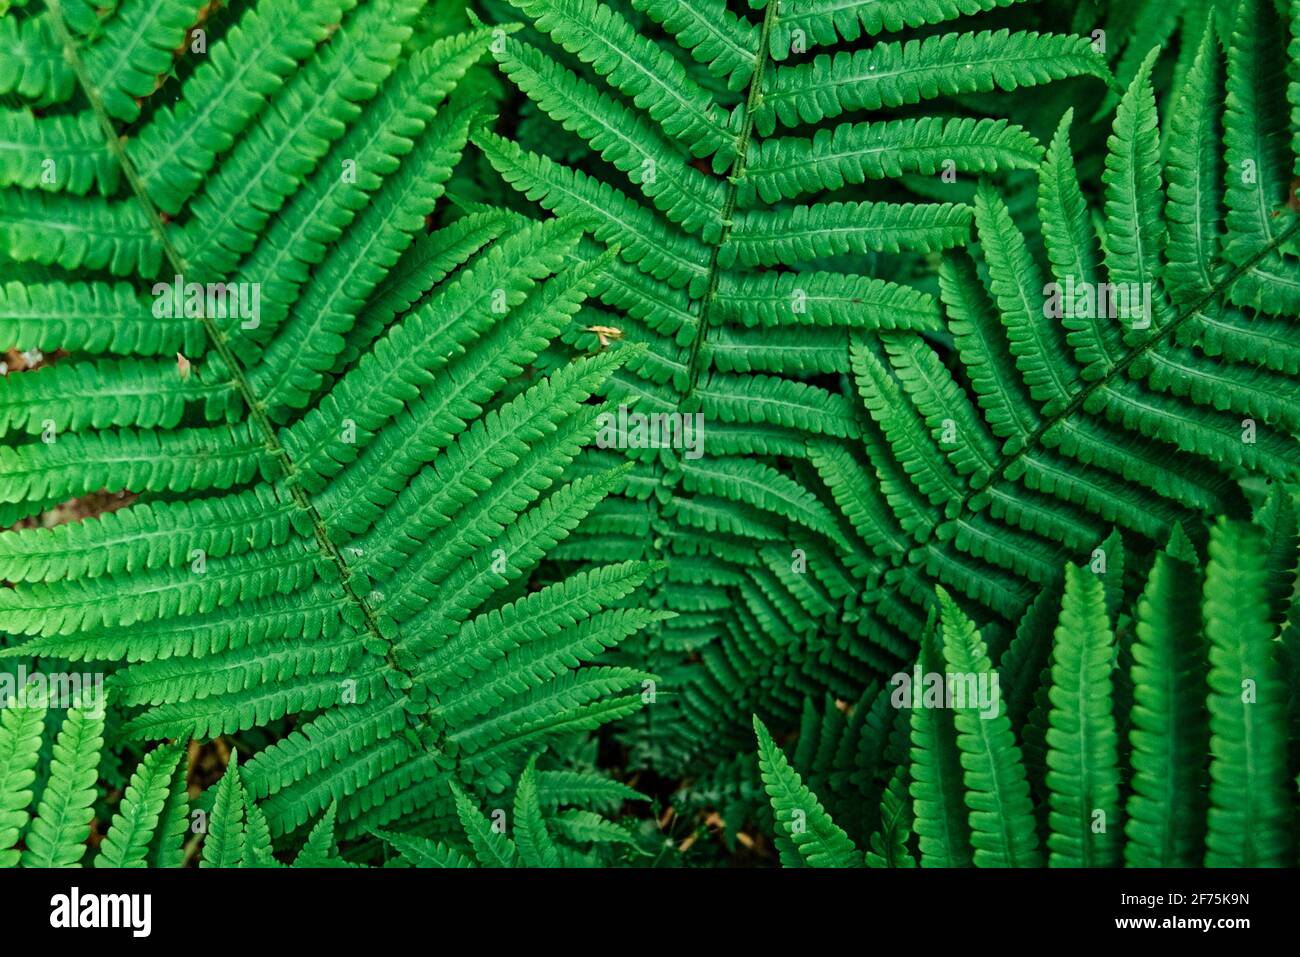 Perfect natural fern pattern. Beautiful background made with young green fern leaves. Stock Photo